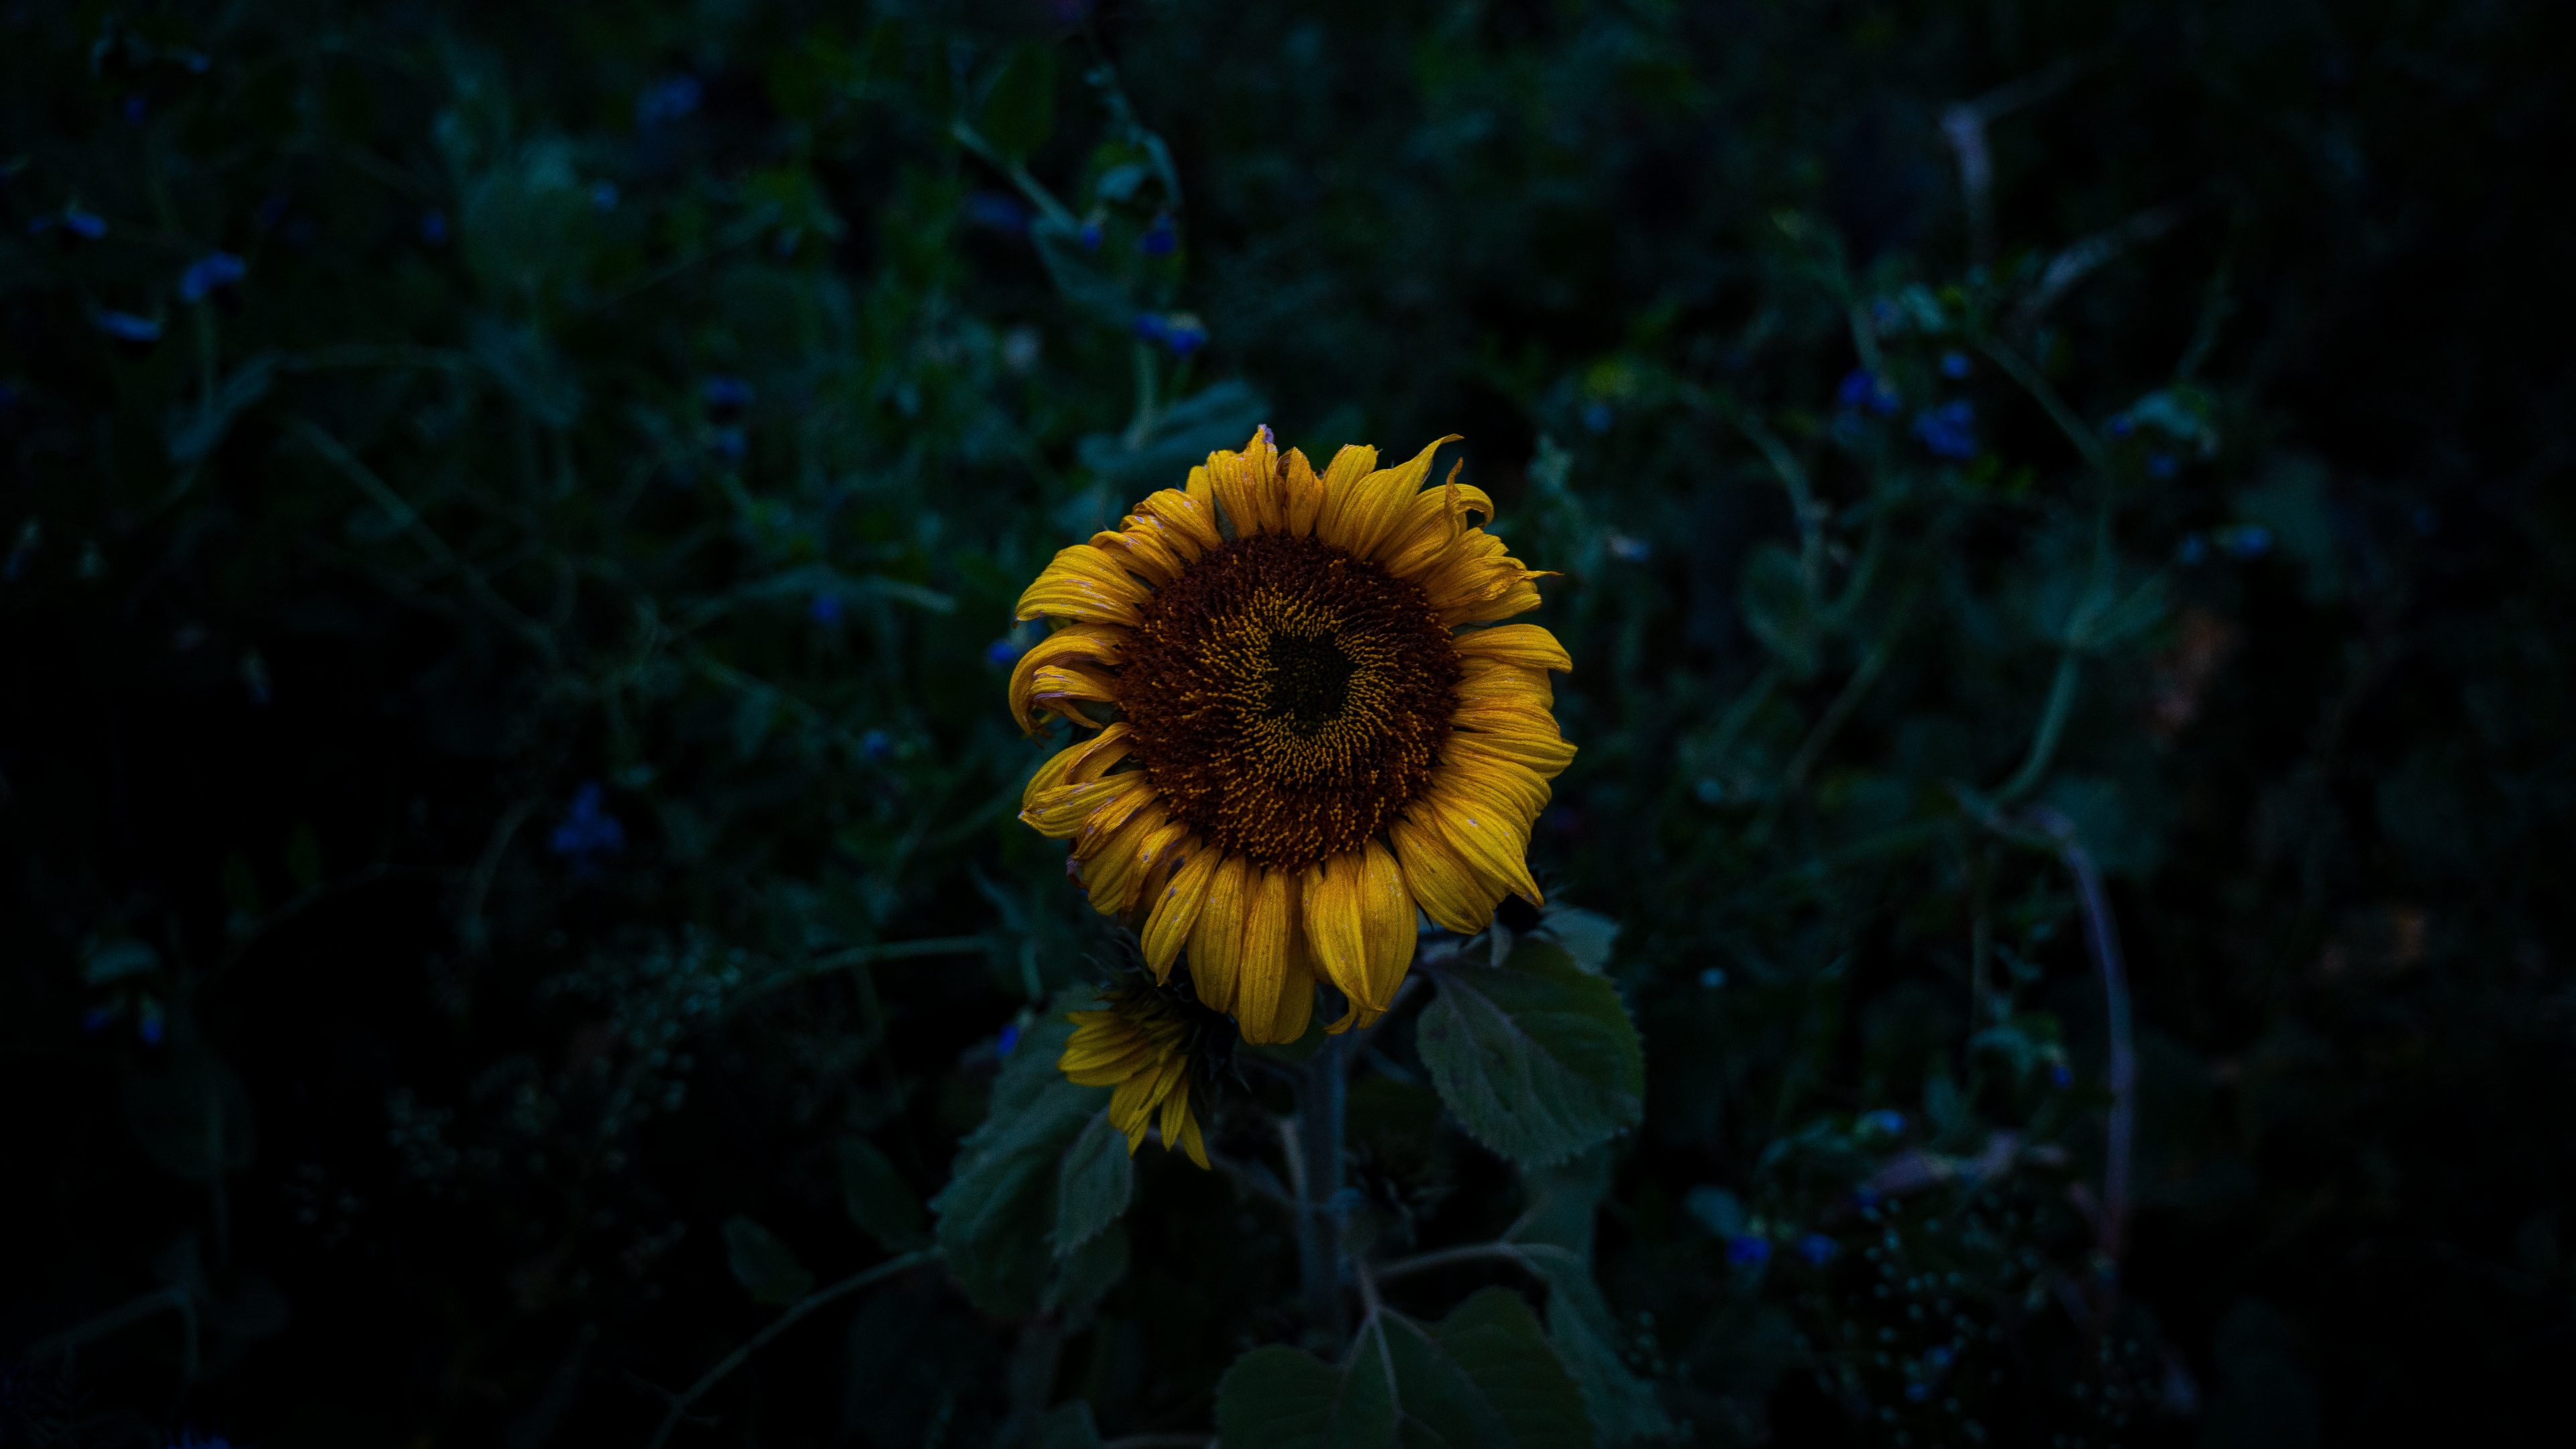 Yellow Sunflower in Bloom During Daytime. Wallpaper in 3840x2160 Resolution